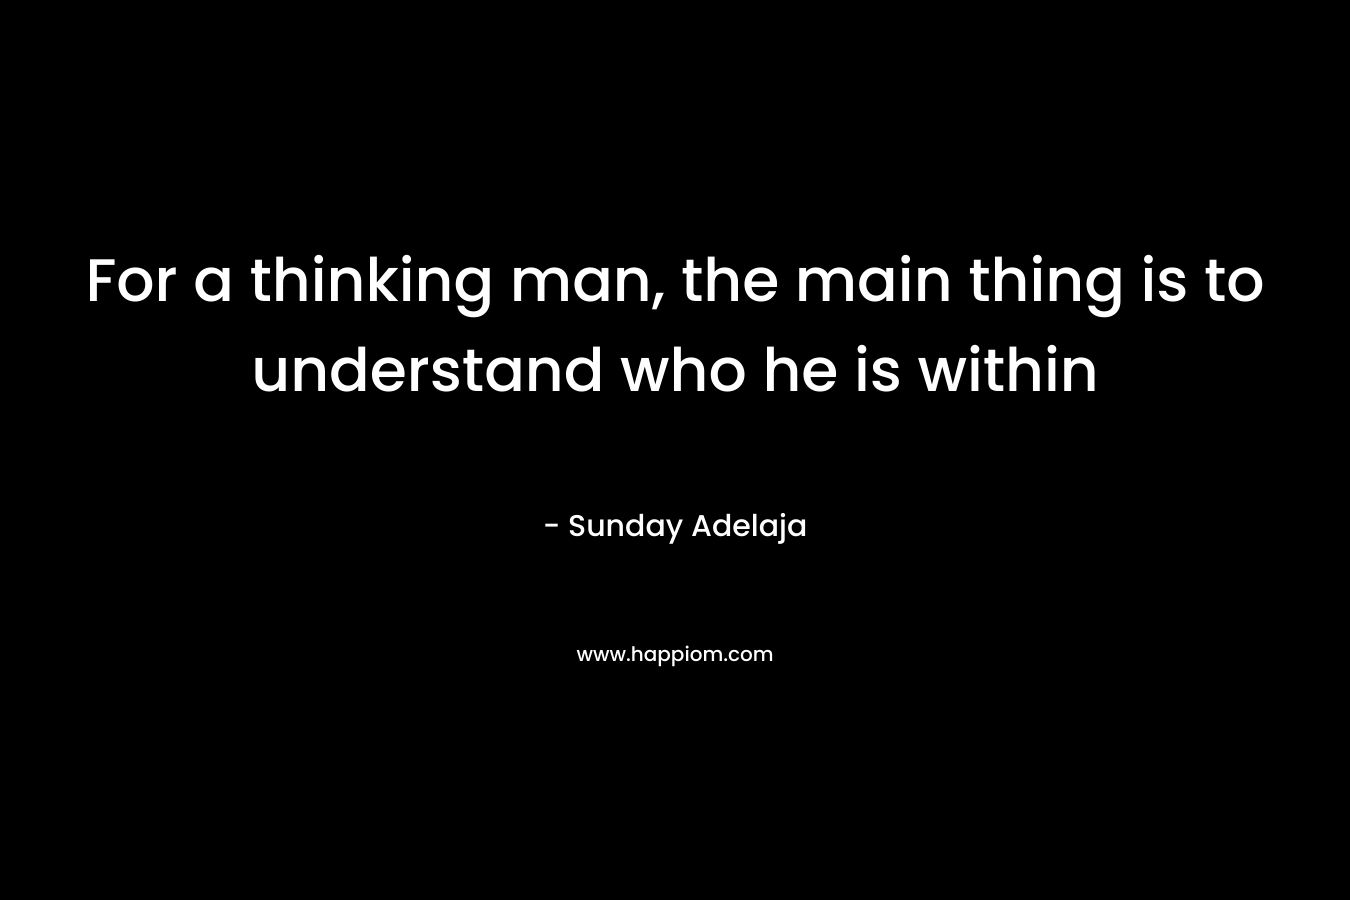 For a thinking man, the main thing is to understand who he is within